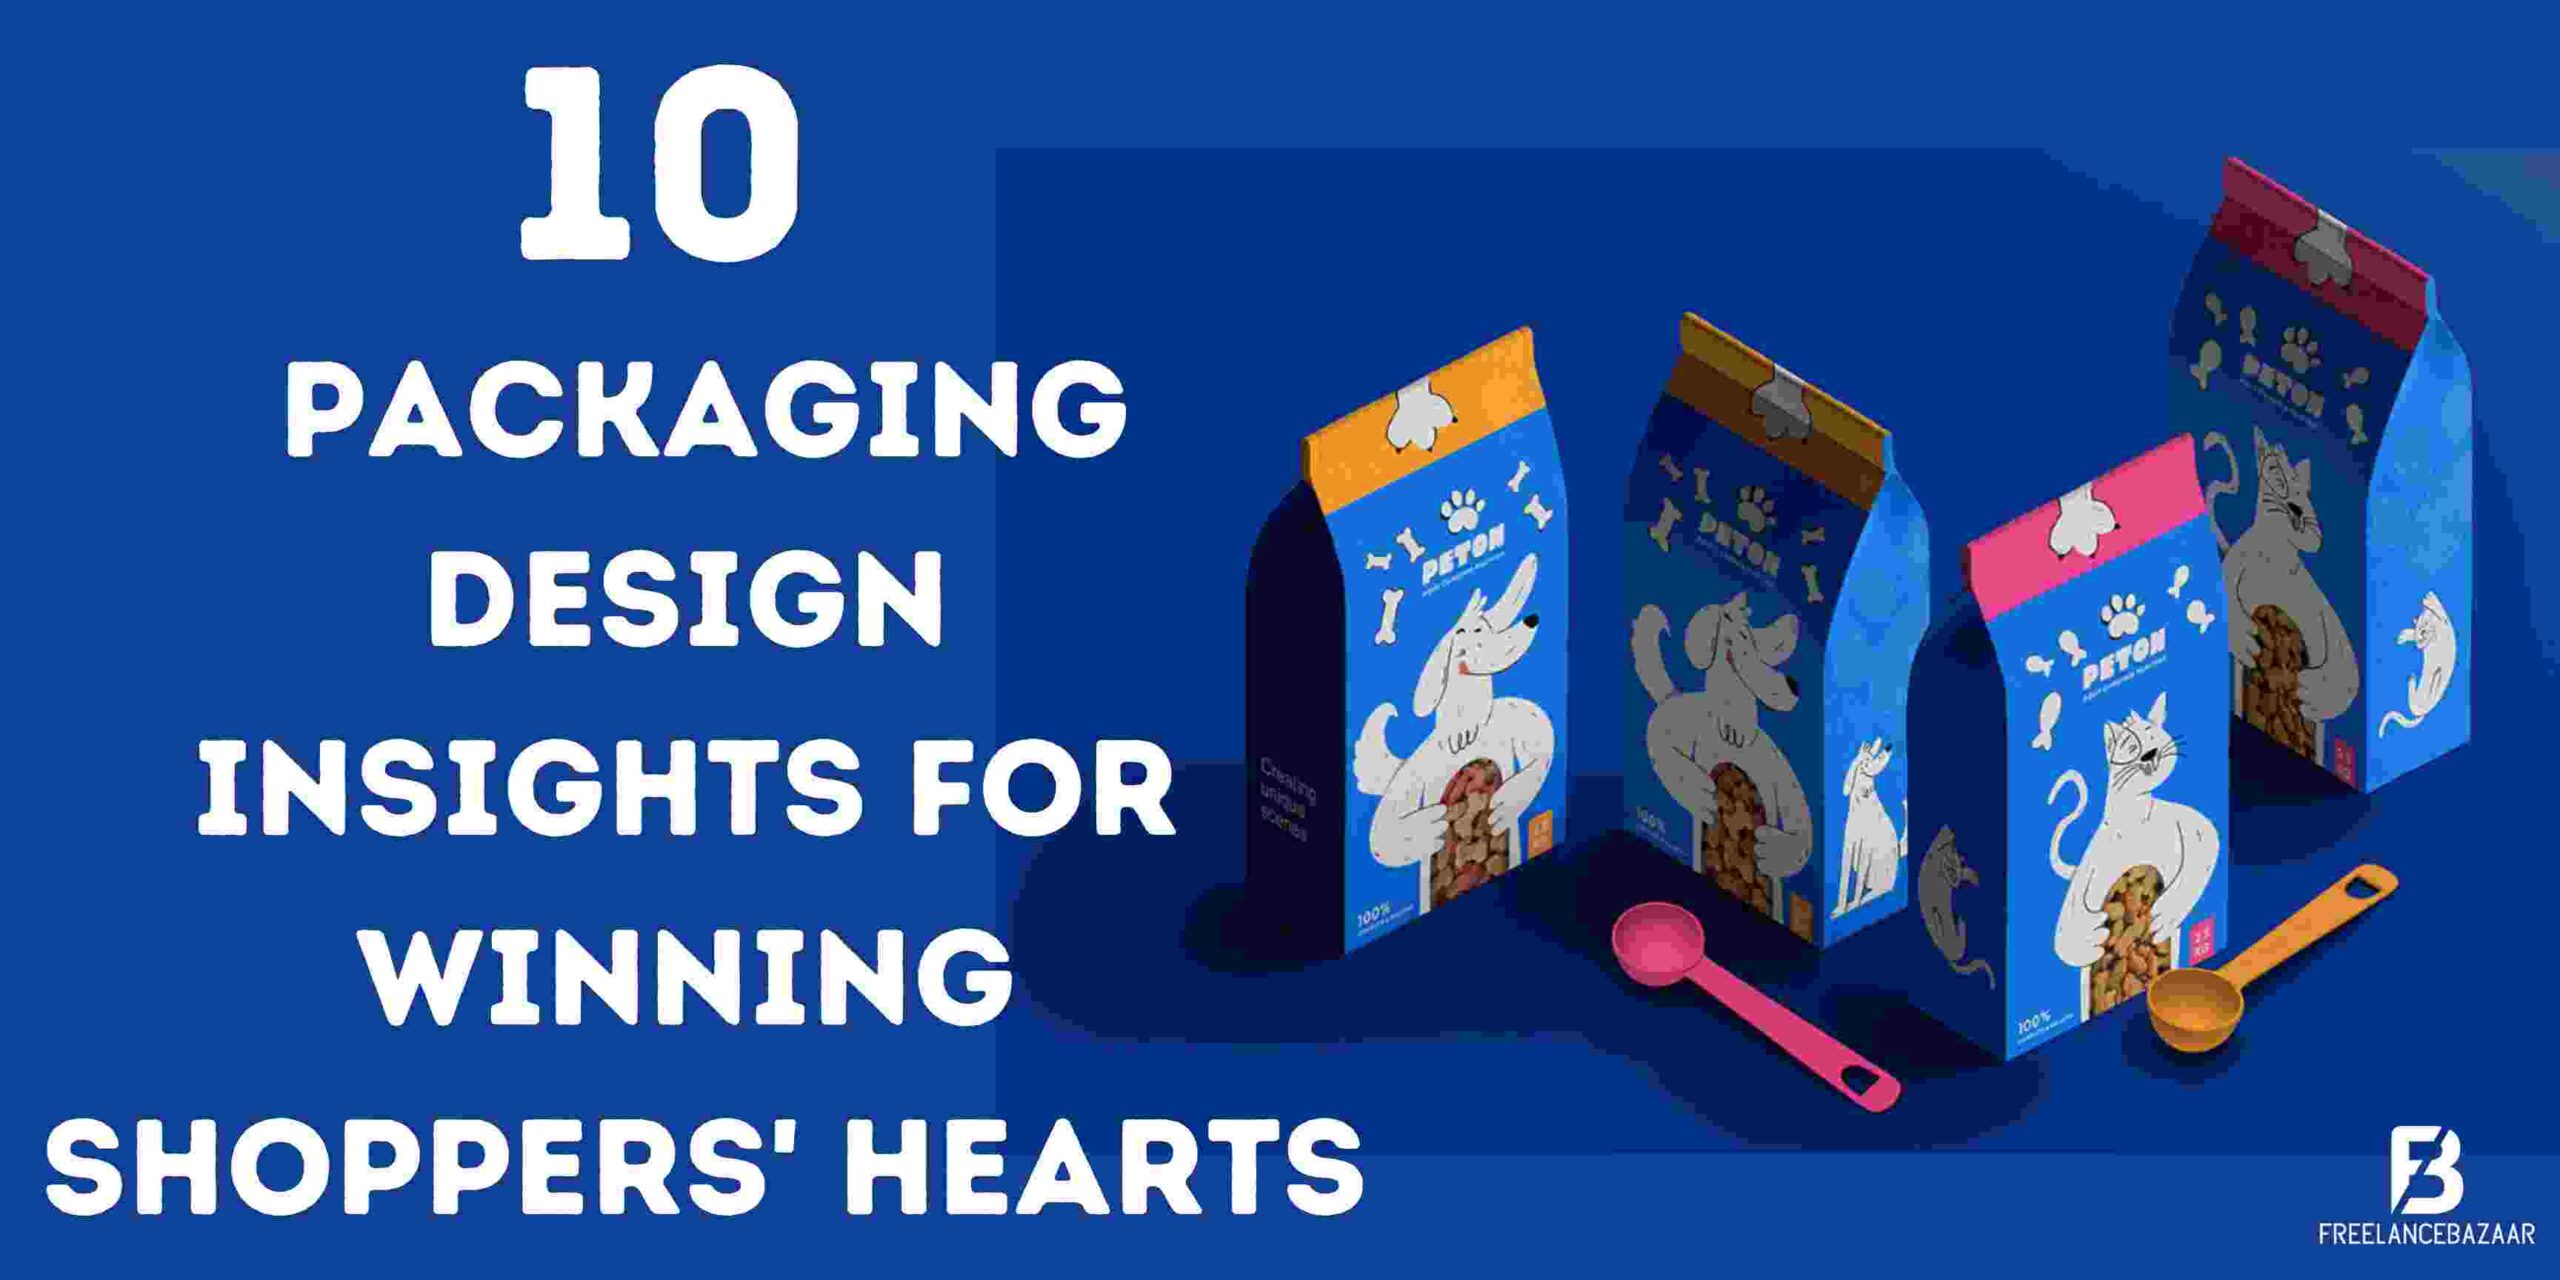 10 Packaging Design Insights for Winning Shoppers' Hearts